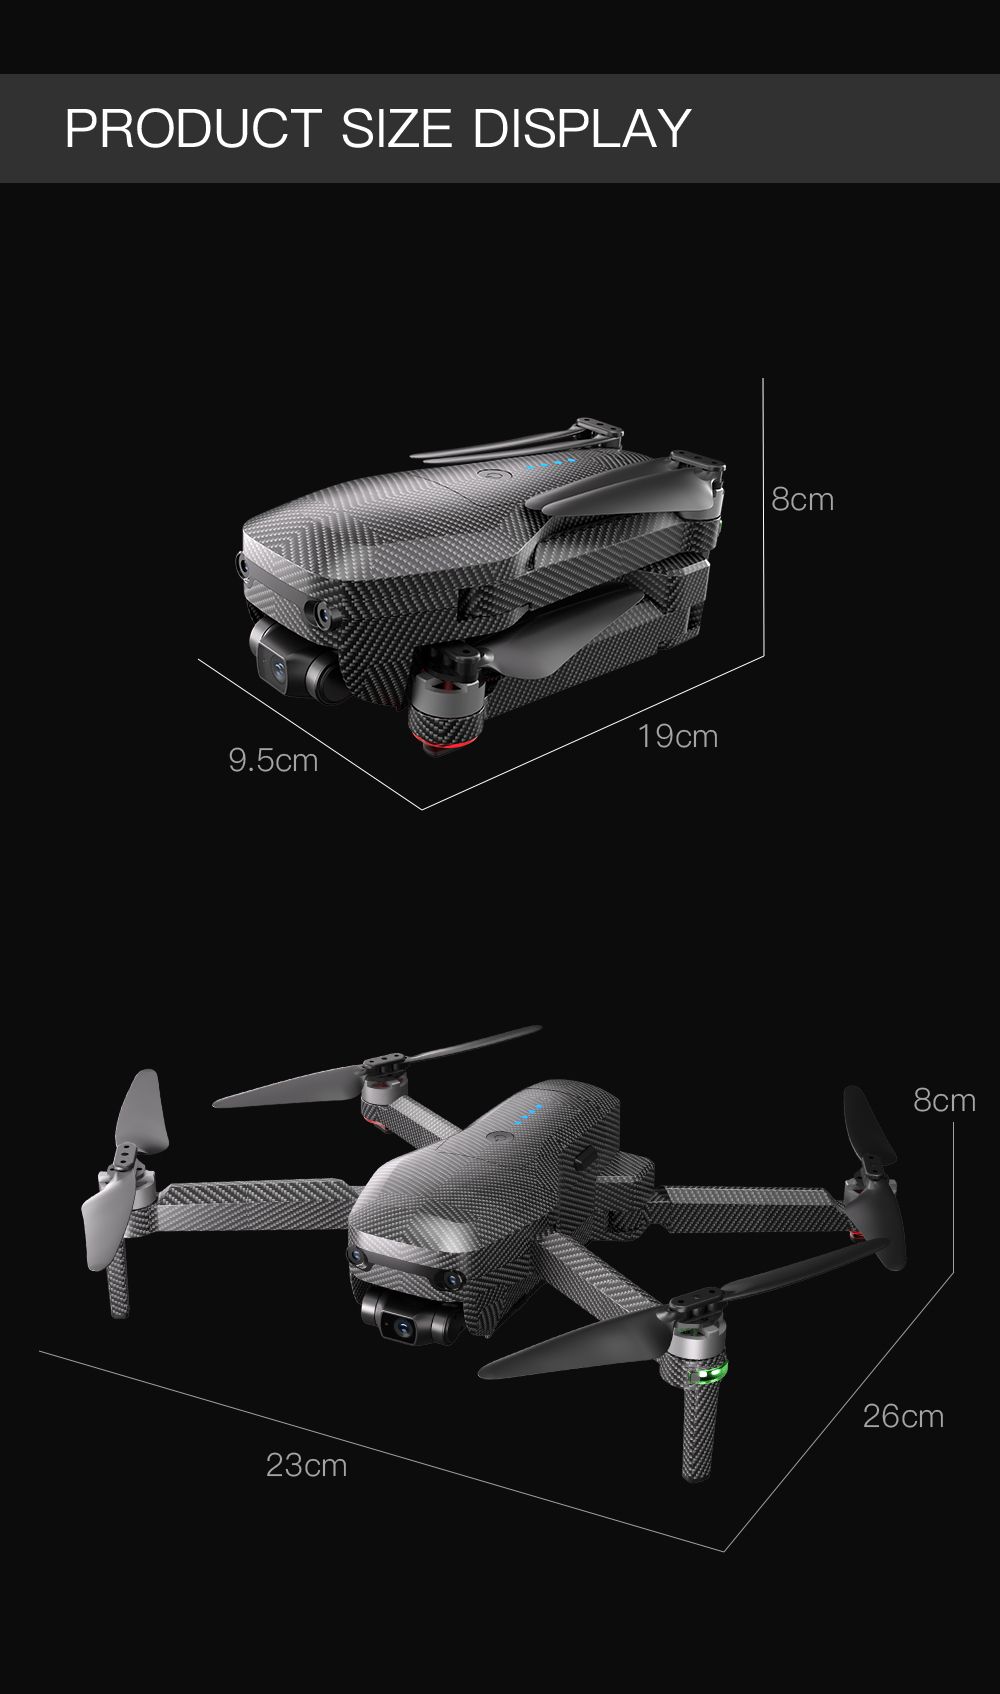 Global Drone GD96 Sony Camera 3-Axis Brushless Gimbal Drone με διπλή αποφυγή οπτικών εμποδίων (20)